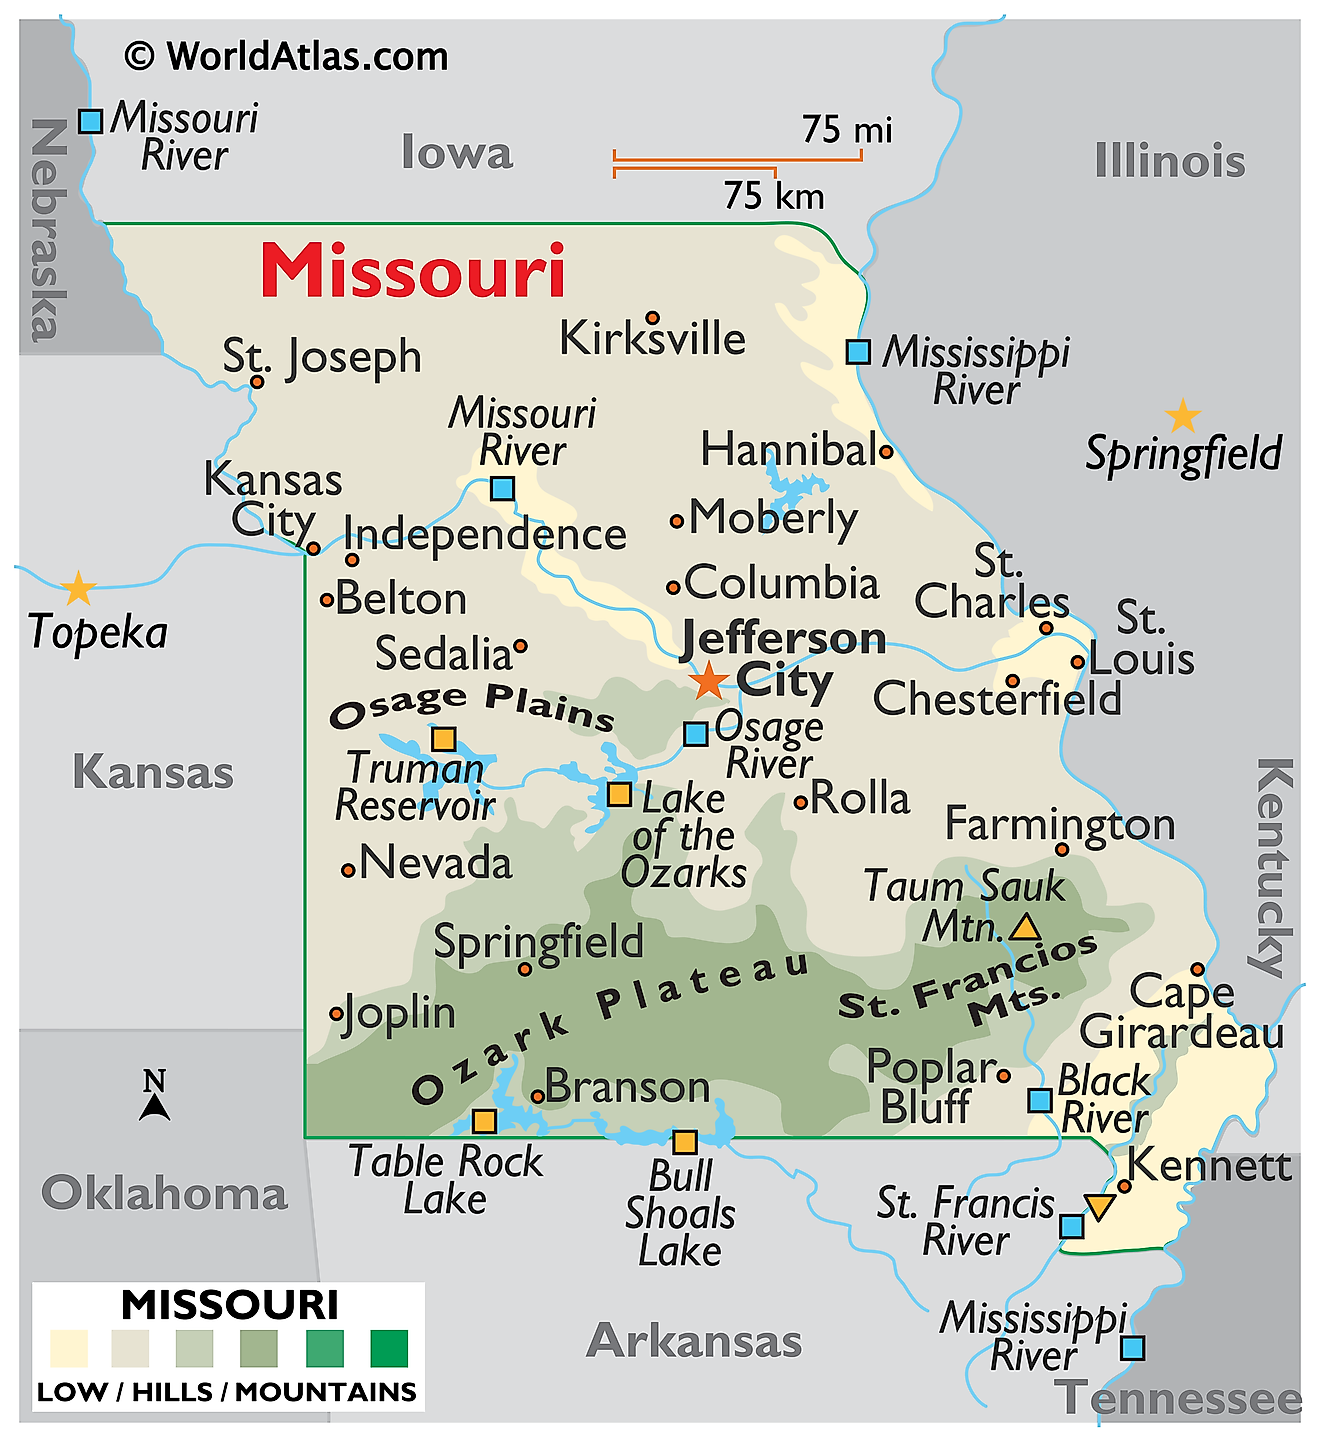 Physical Map of Missouri. It shows the physical features of Missouri including its mountain ranges, rivers, and major lakes.